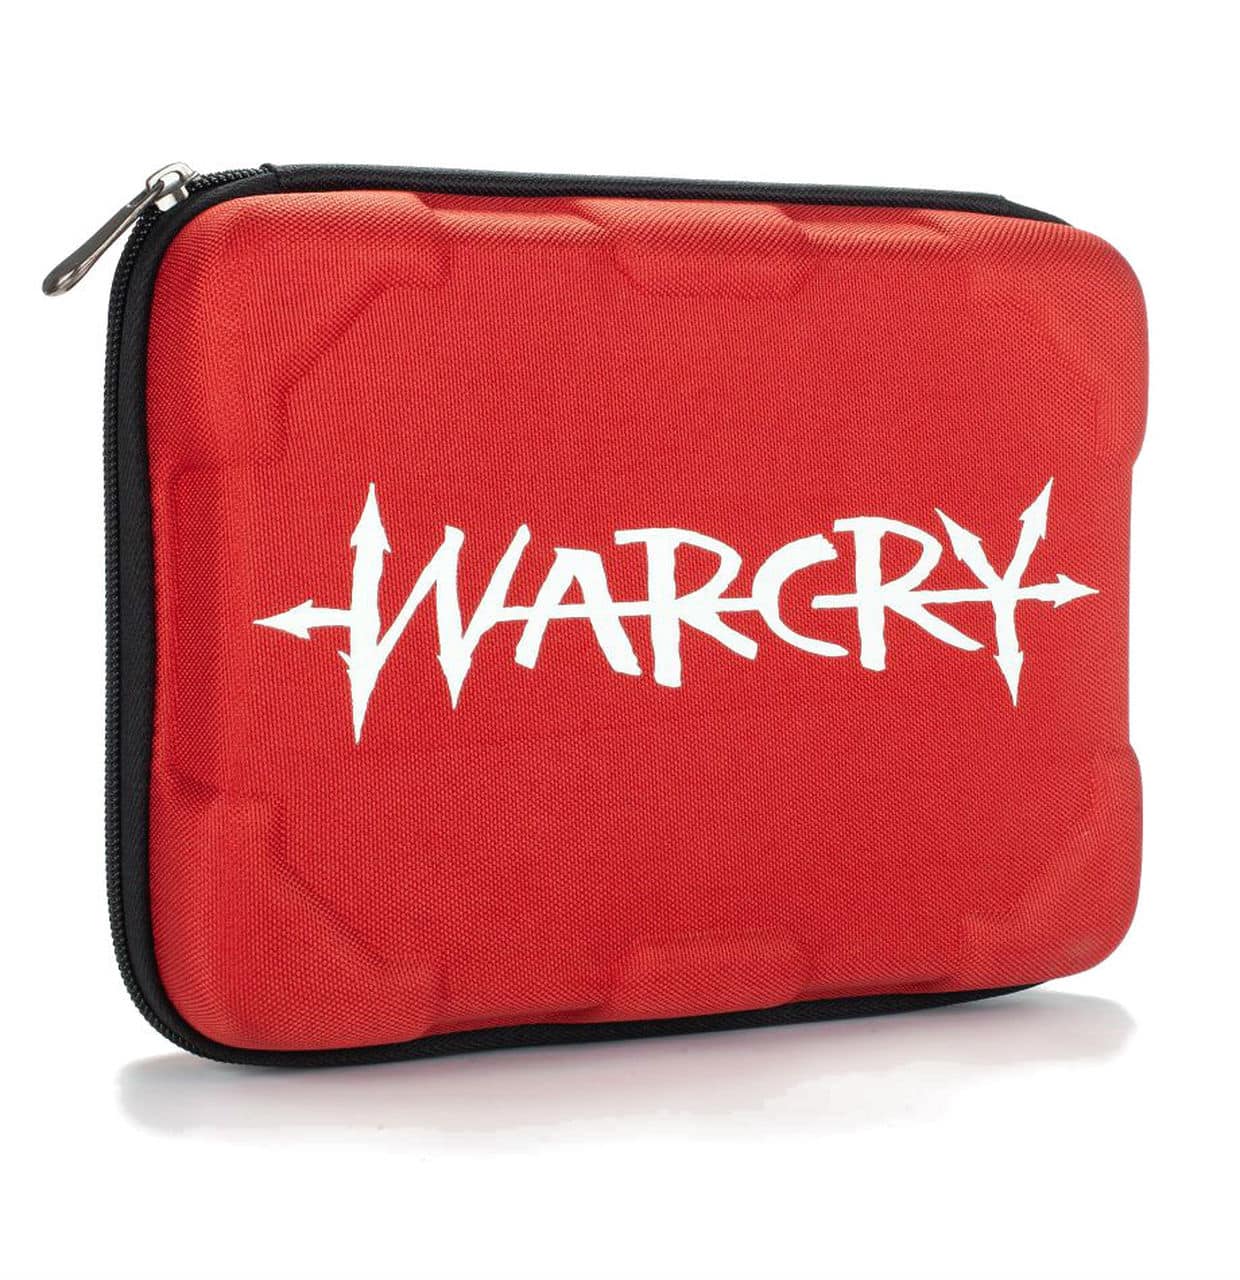 Warcry - Carry Case